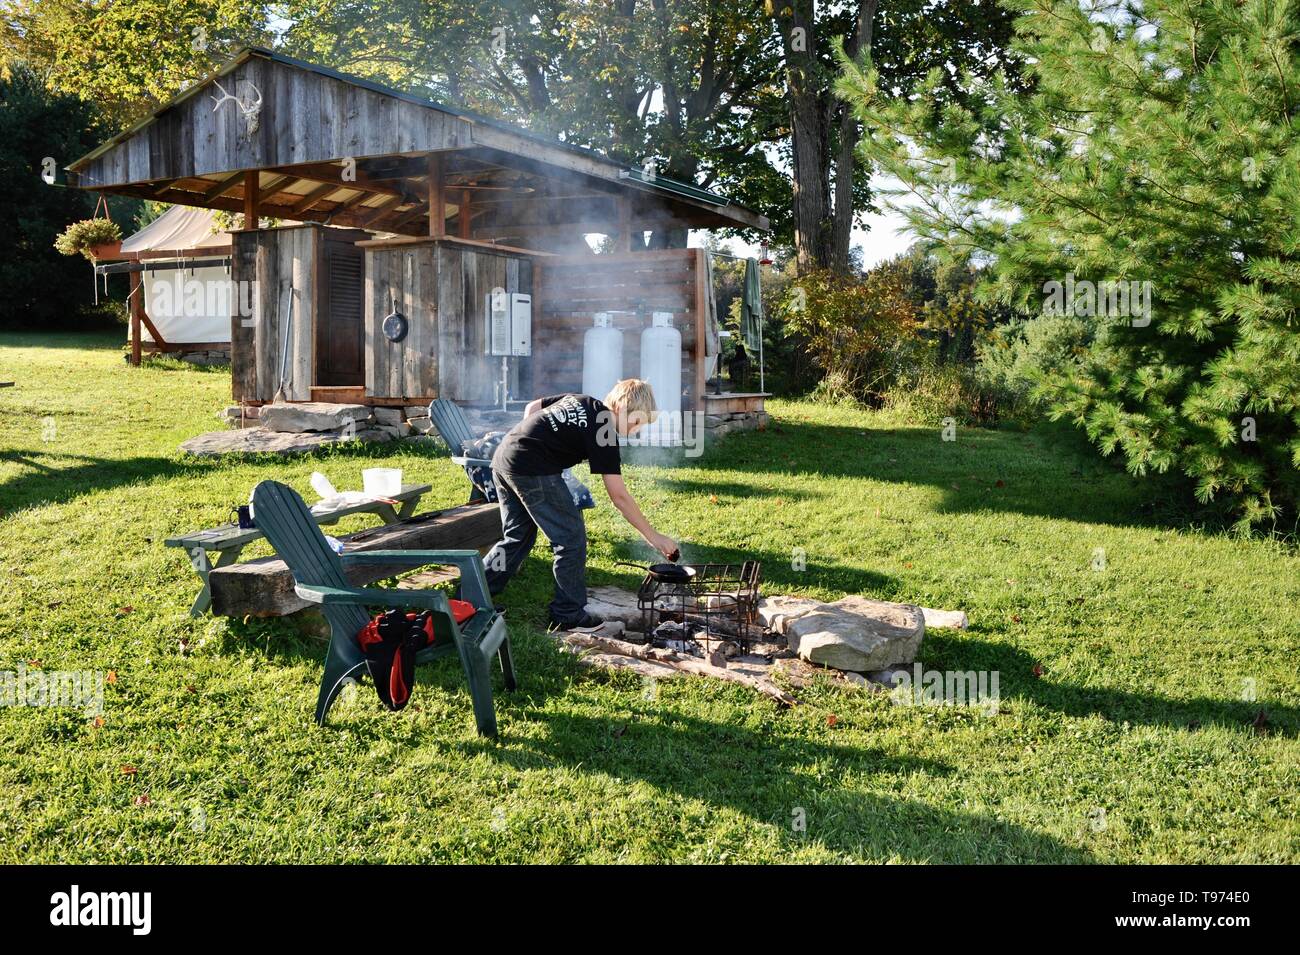 Outdoor kitchen facilities, stove, table, pans and pots, for 'glamping' (glamorous camping) experience at Campbell Farm, Fort Hill, Pennsylvania USA Stock Photo